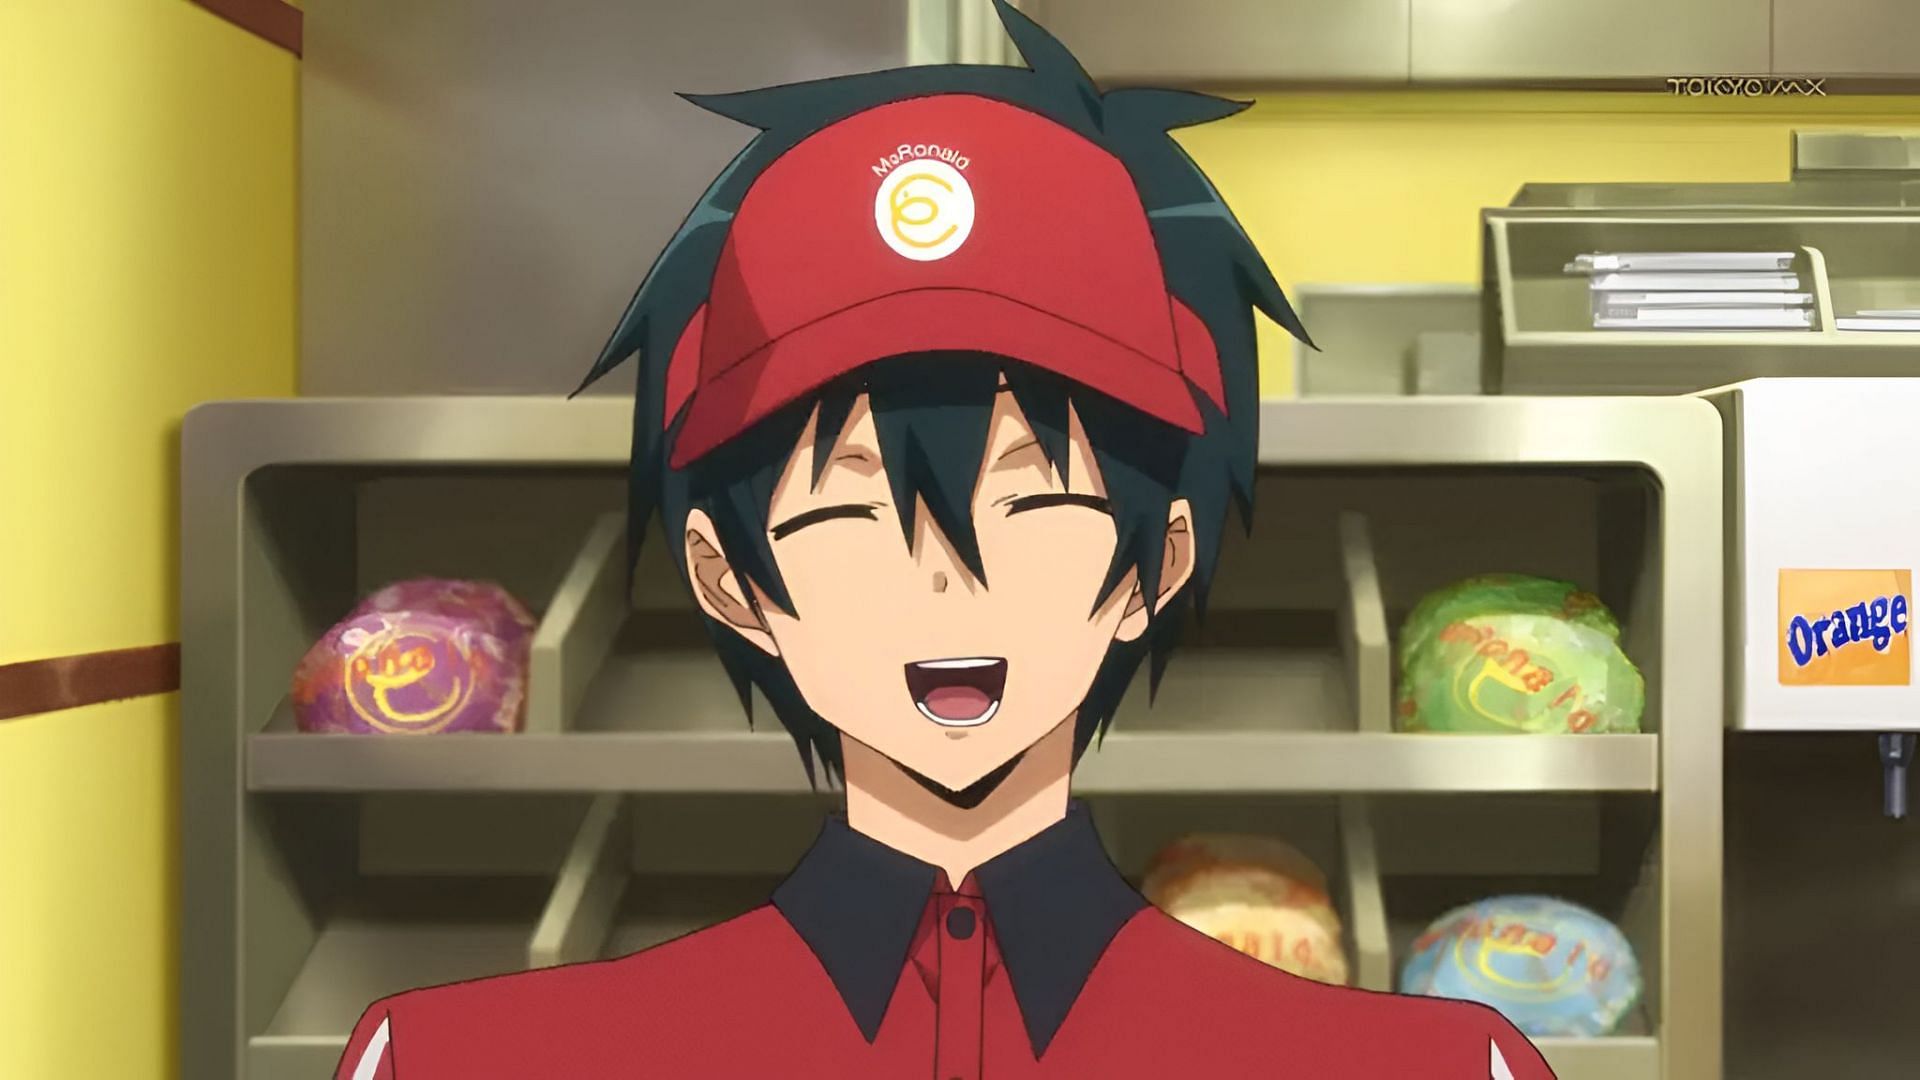 Maou as seen in the anime (Image via White Fox)